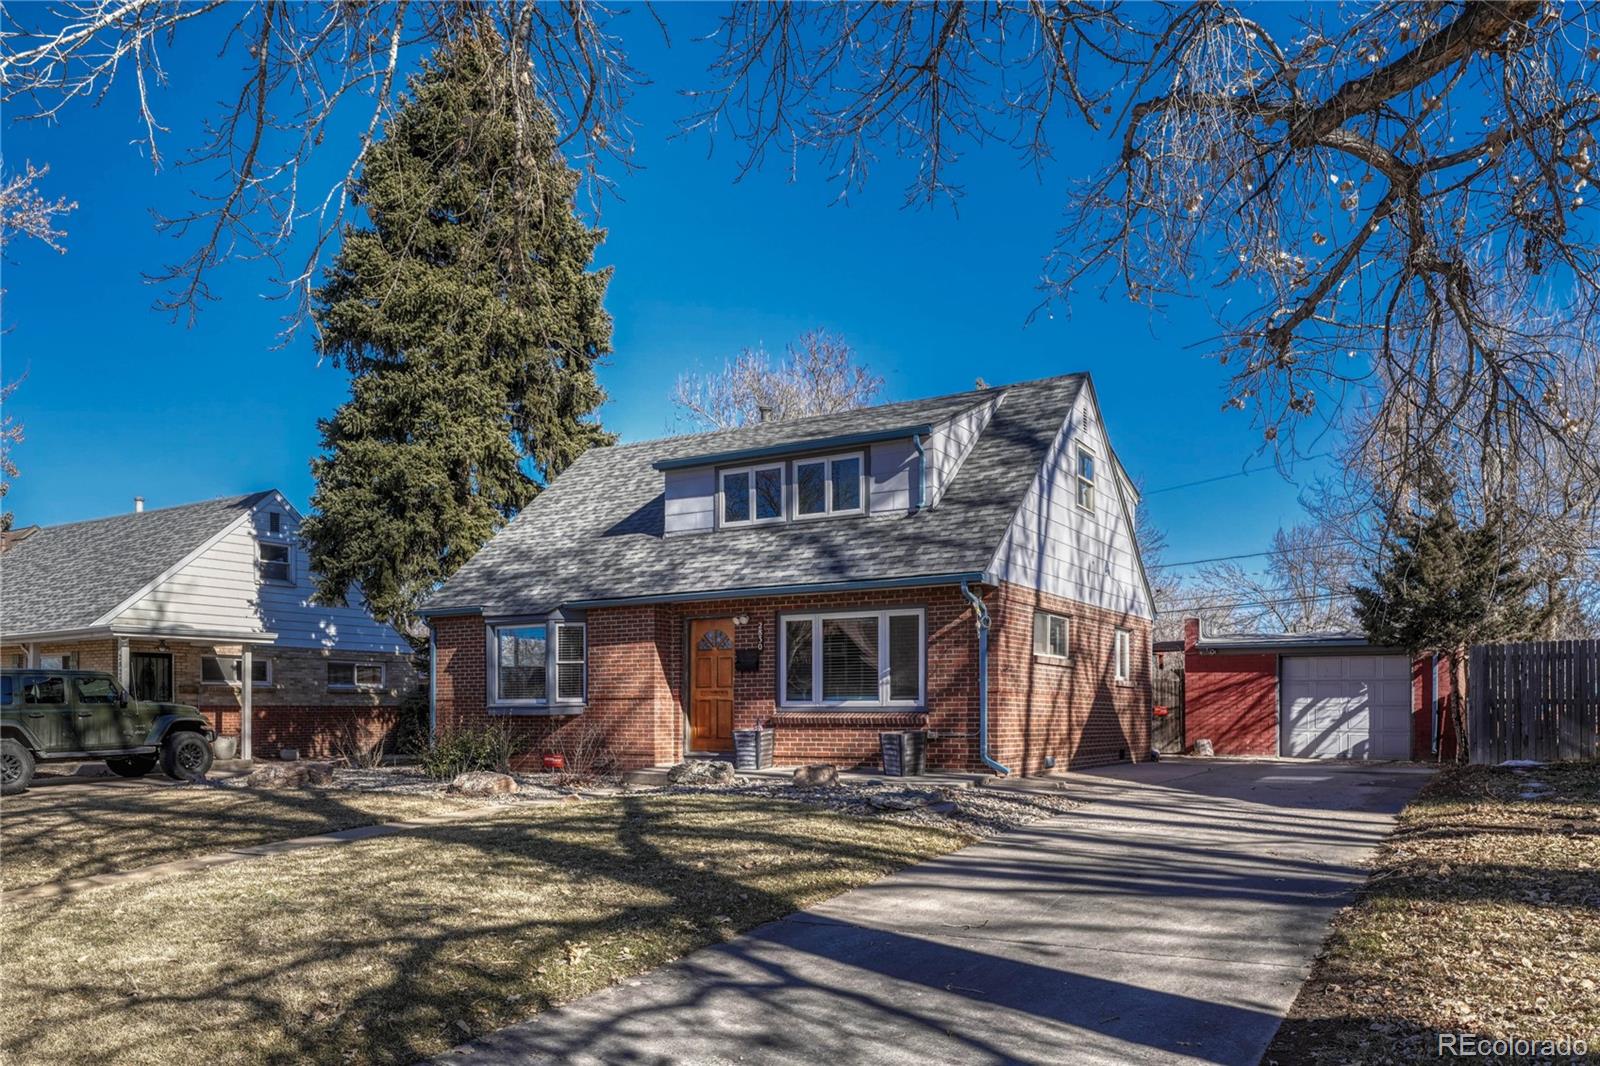 2830 s gaylord street, denver sold home. Closed on 2024-03-15 for $805,000.